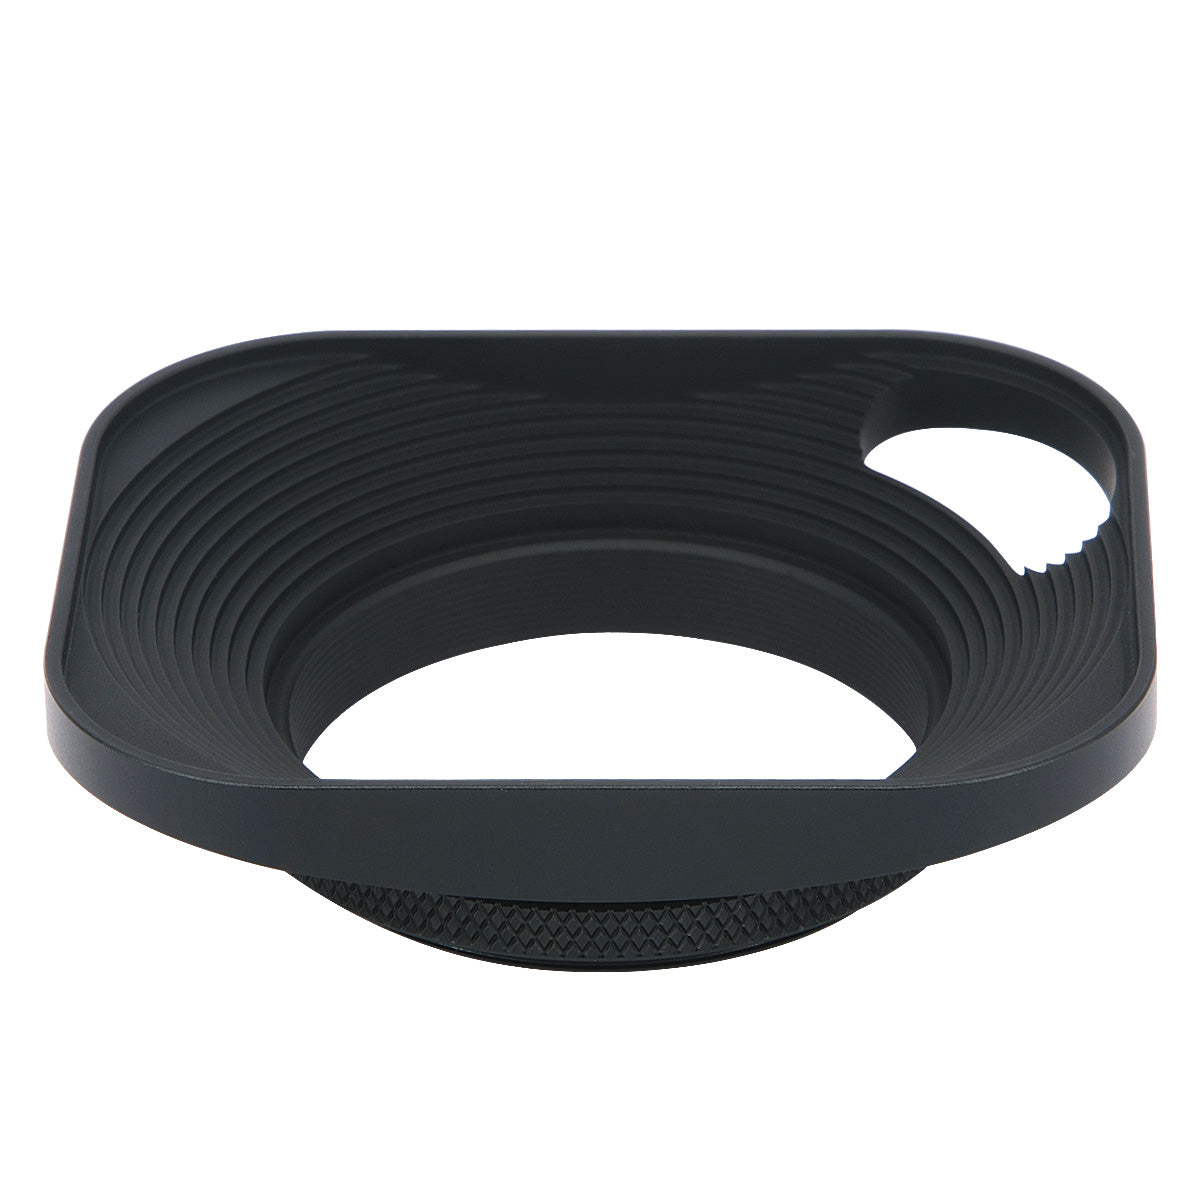 Haoge LH-B43P 43mm Square Metal Screw-in Lens Hood Hollow Out Designed with Cap for Leica Rangefinder Camera with 43mm E43 Filter Thread Lens Black